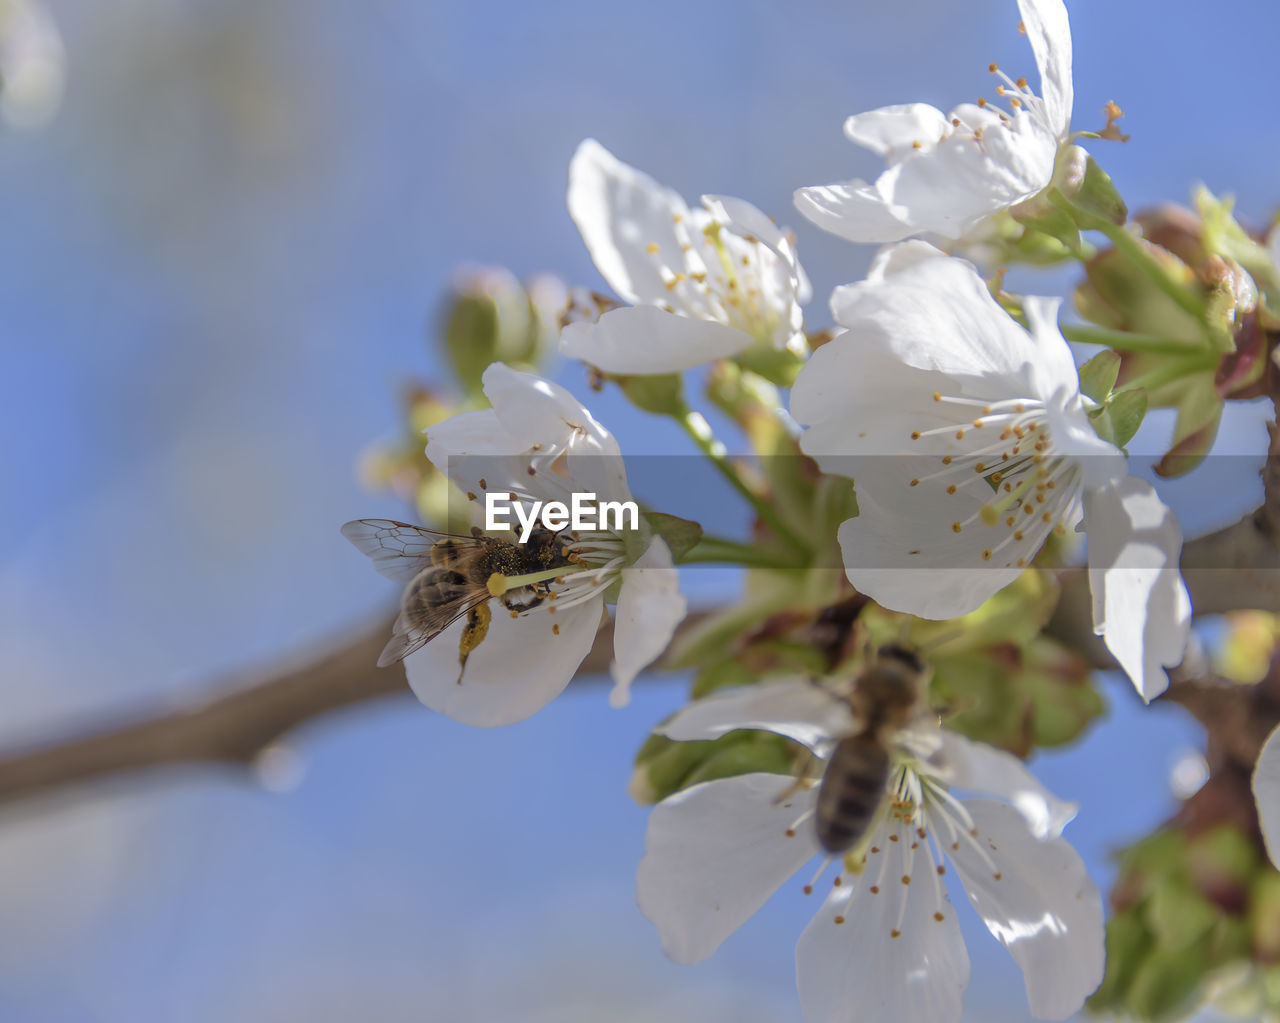 plant, flower, flowering plant, blossom, beauty in nature, fragility, freshness, nature, growth, branch, springtime, tree, close-up, produce, white, flower head, macro photography, petal, sky, no people, spring, blue, focus on foreground, inflorescence, fruit, day, food, outdoors, fruit tree, pollen, prunus spinosa, botany, twig, sunlight, food and drink, almond tree, stamen, selective focus, apple tree, cherry blossom, sunny